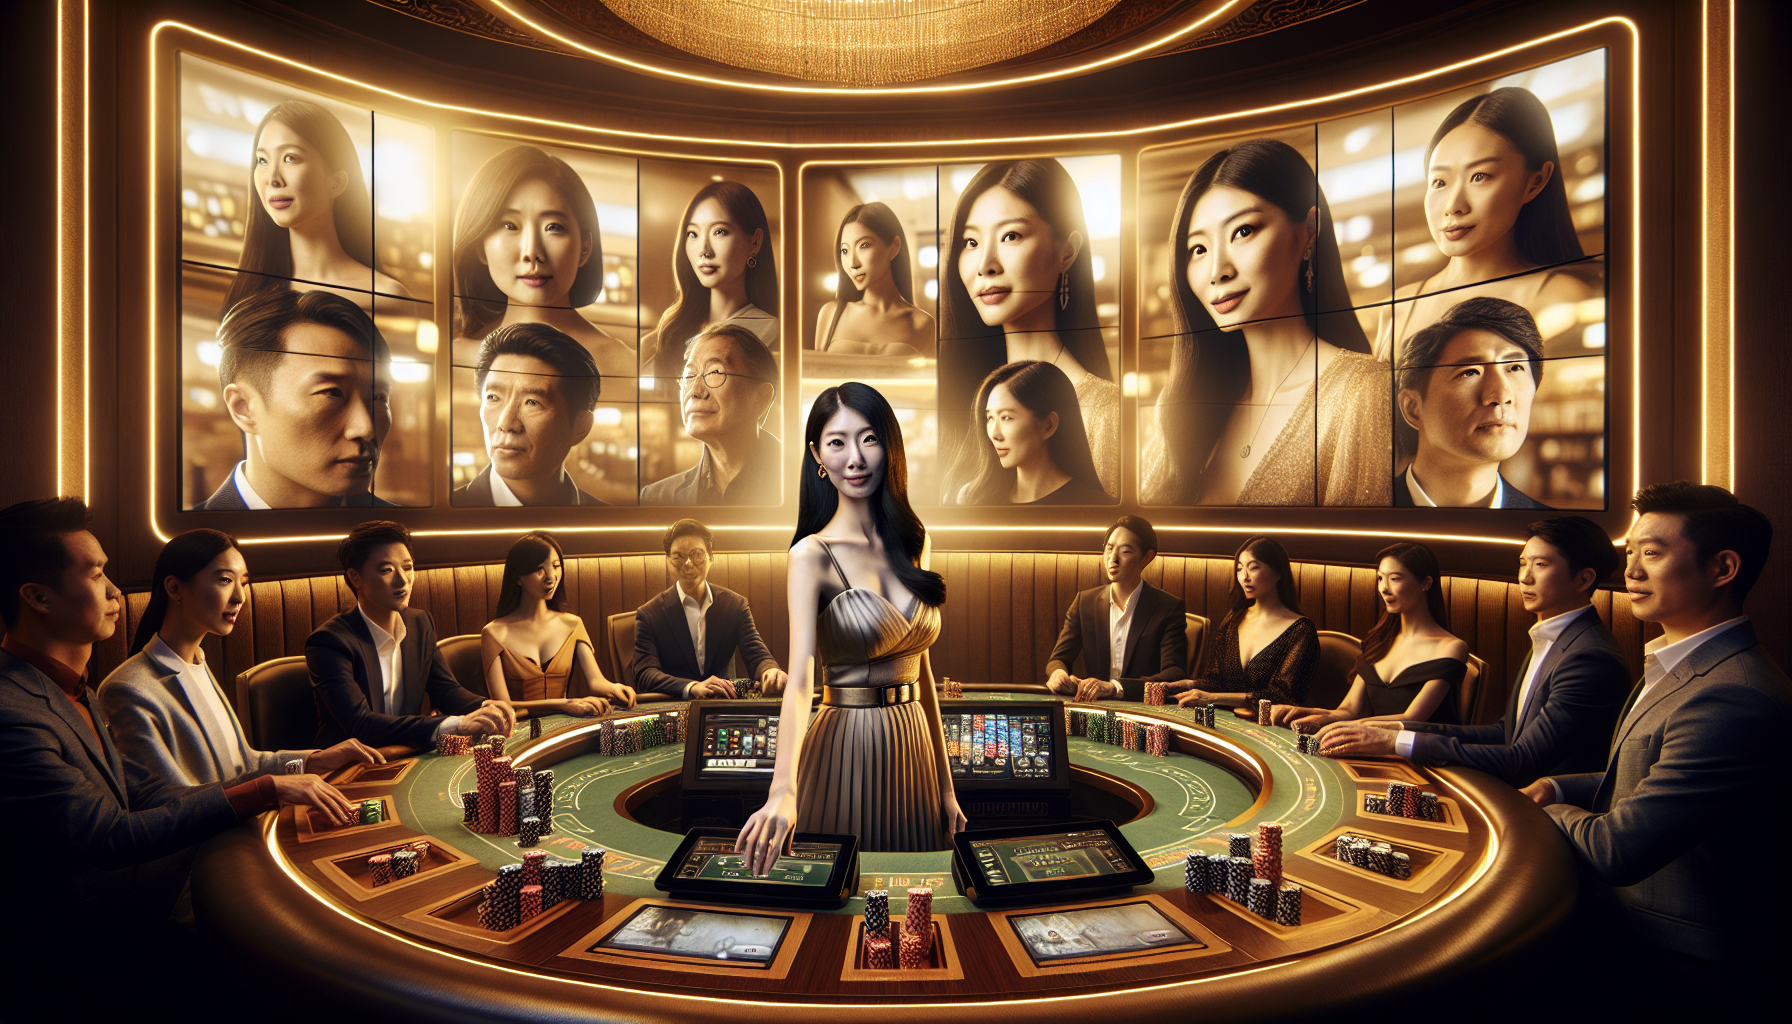 Illustration of a live dealer interacting with players at an online casino game